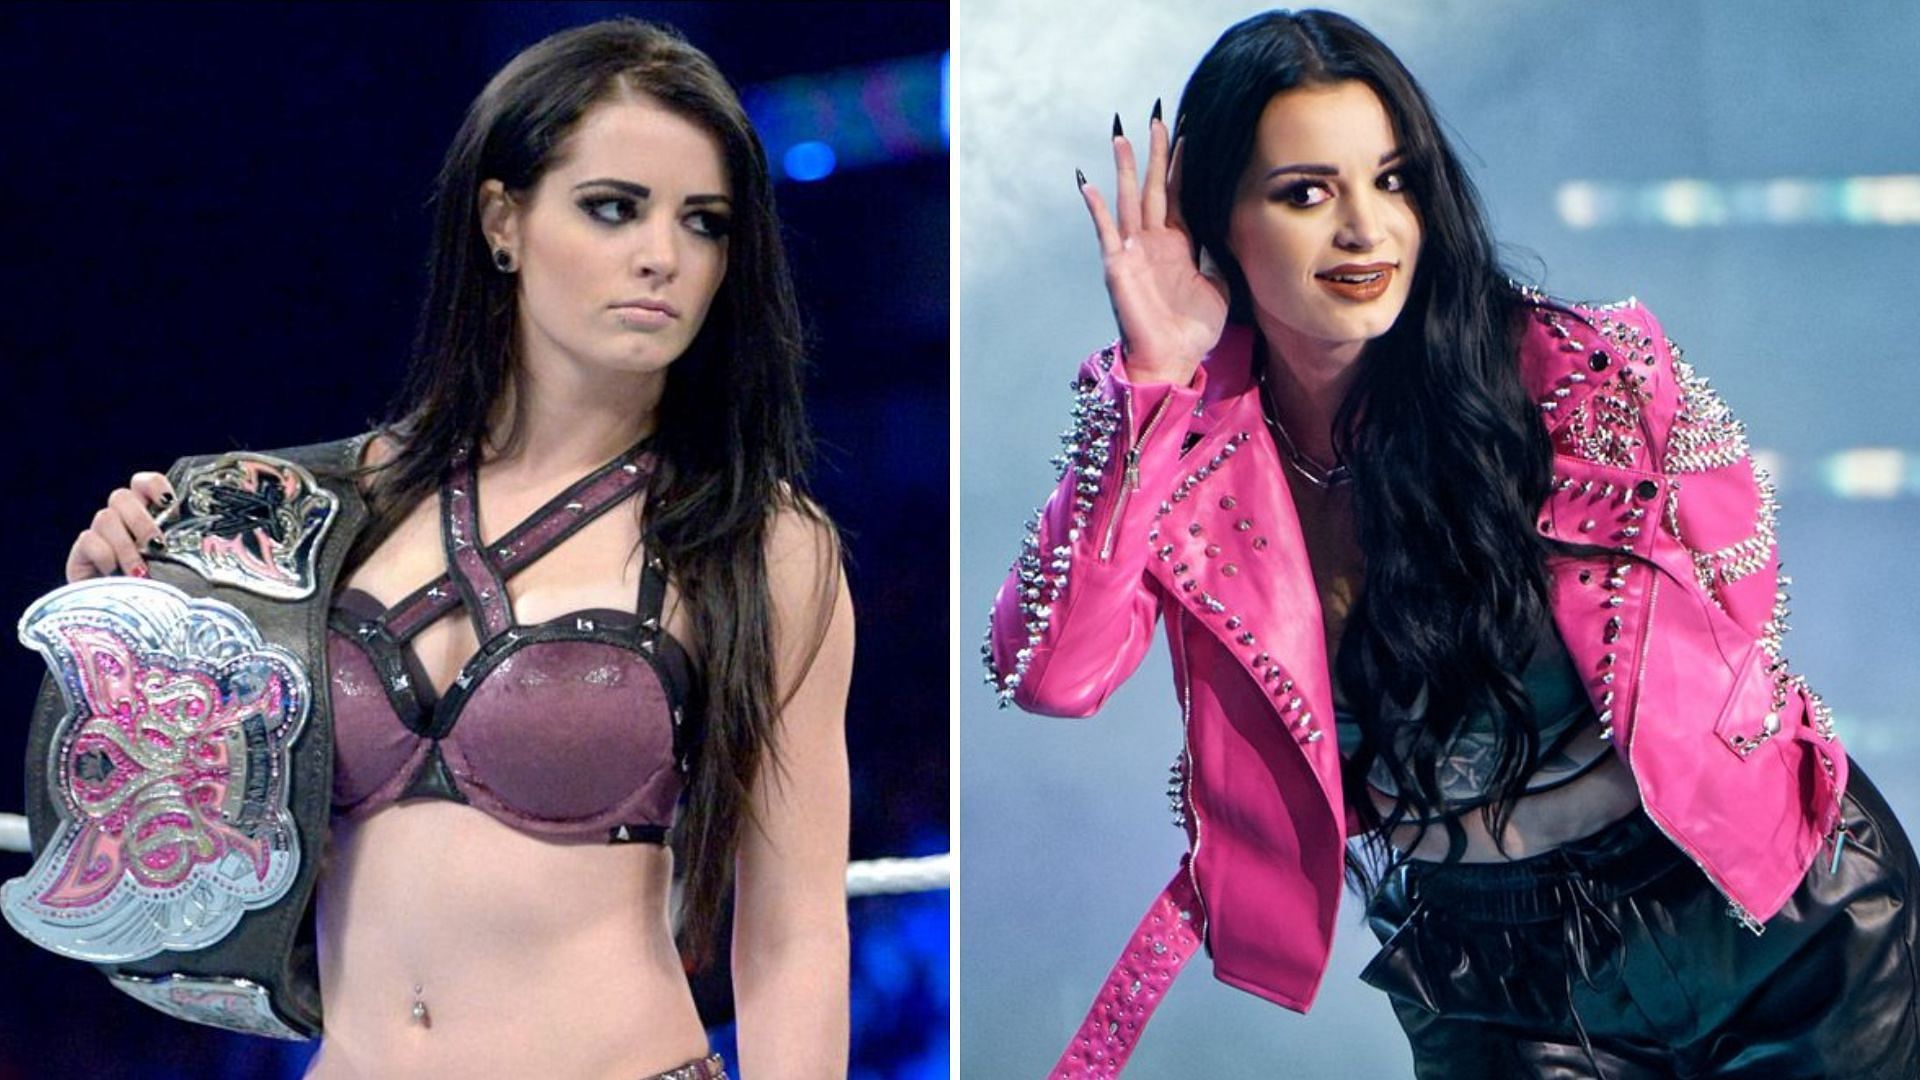 Paige is a former WWE Superstar that exited the company in 2022